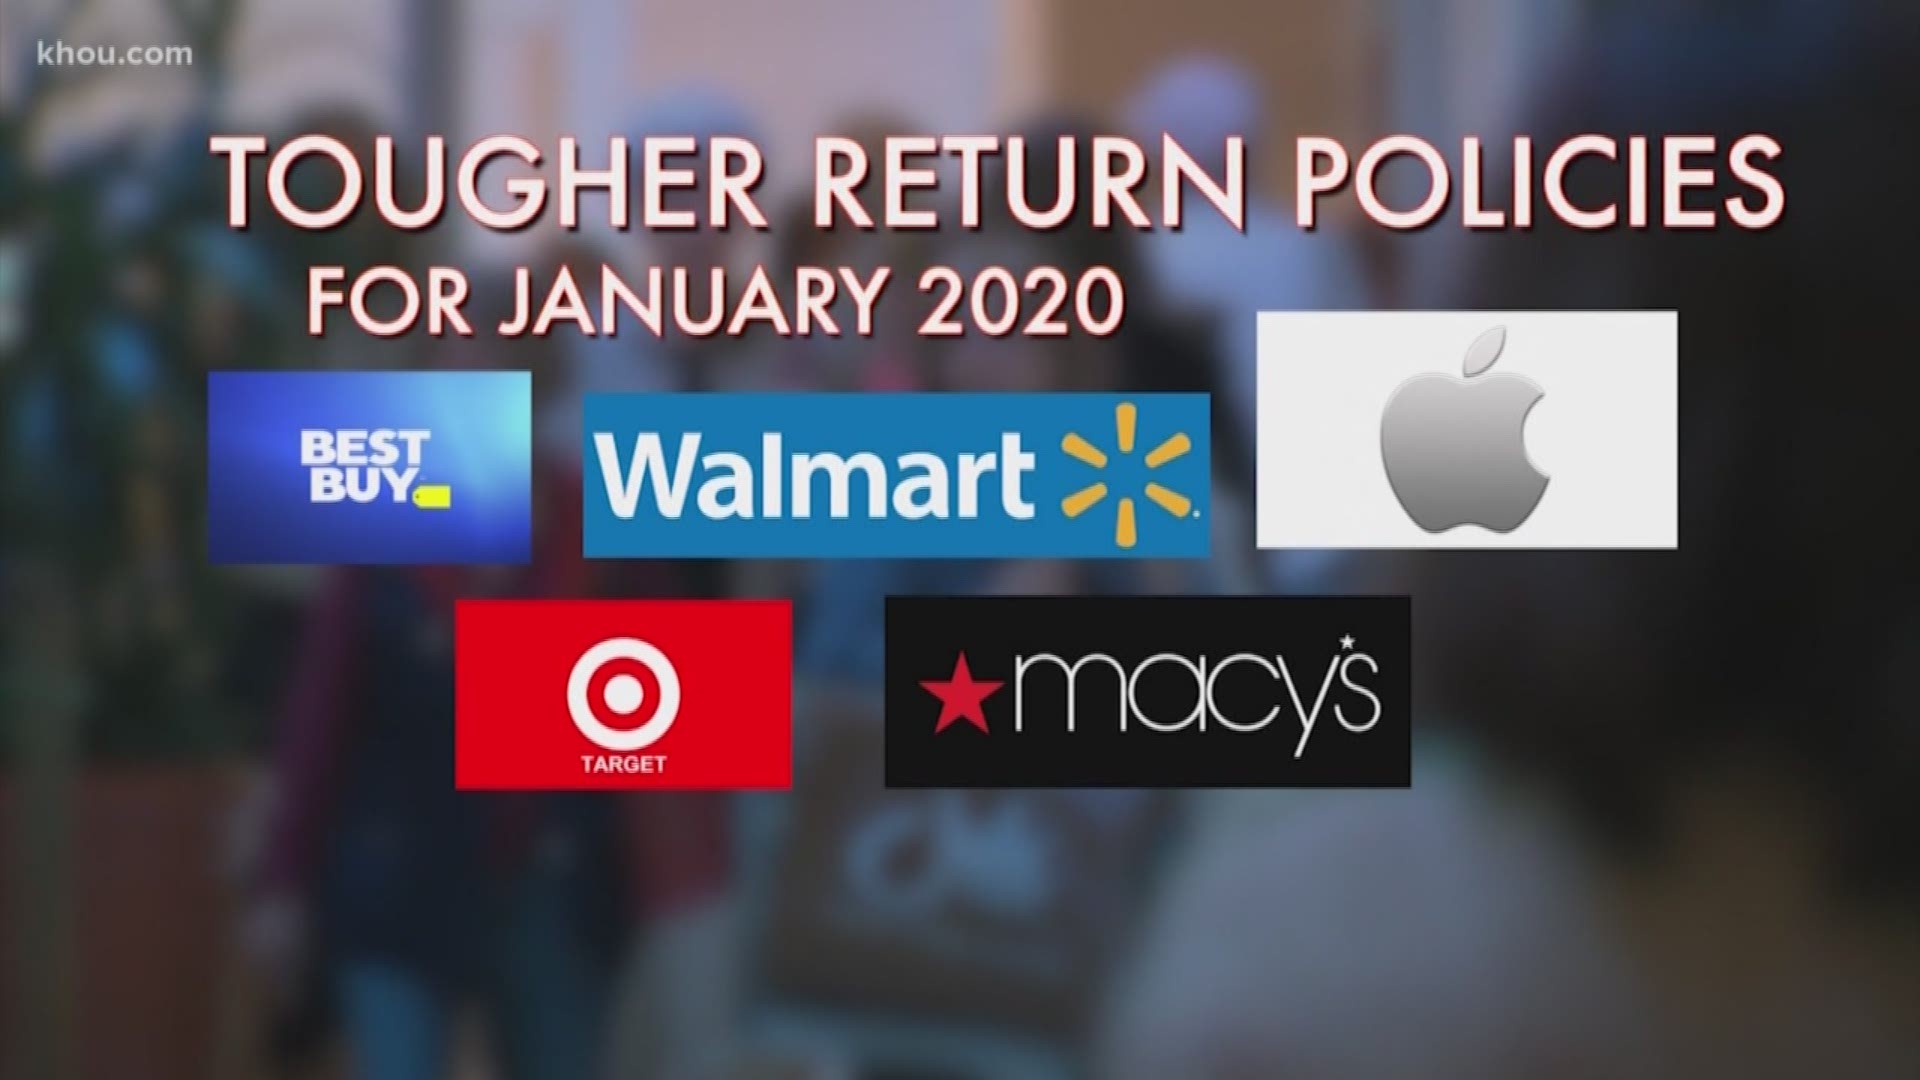 Holiday shopping season is about to turn into “holiday return" season. And this year, even the most generous stores, have begun tightening their return policies.